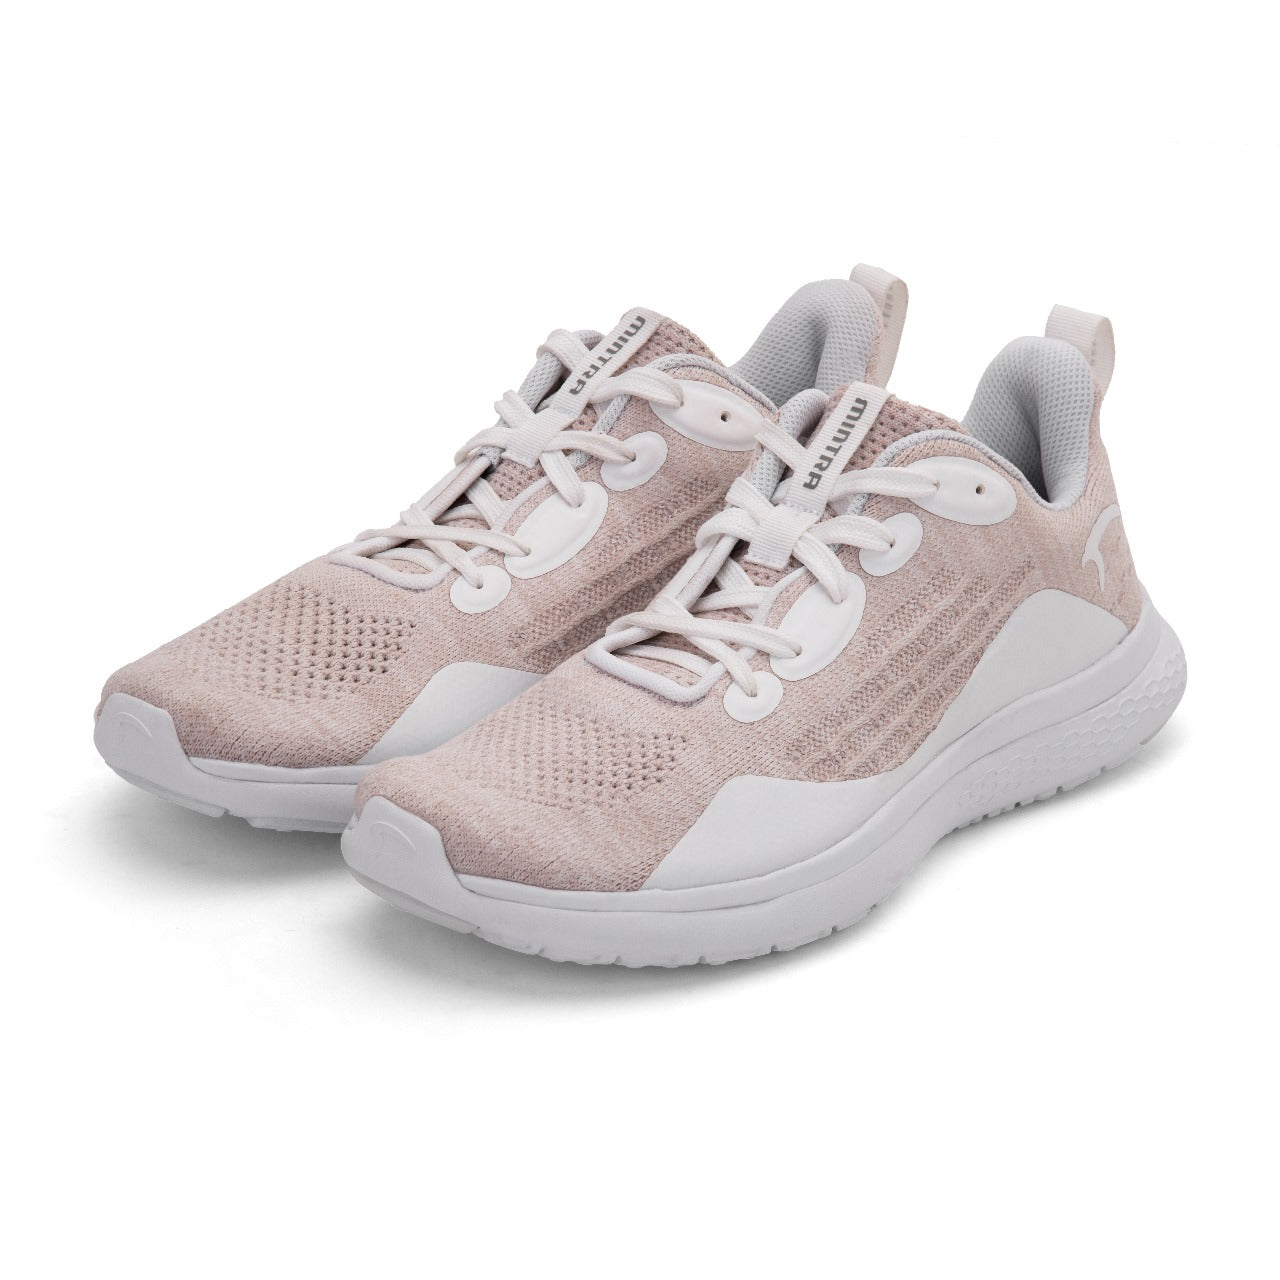 Mintra Stride Running Shoes For Women, Rose & White